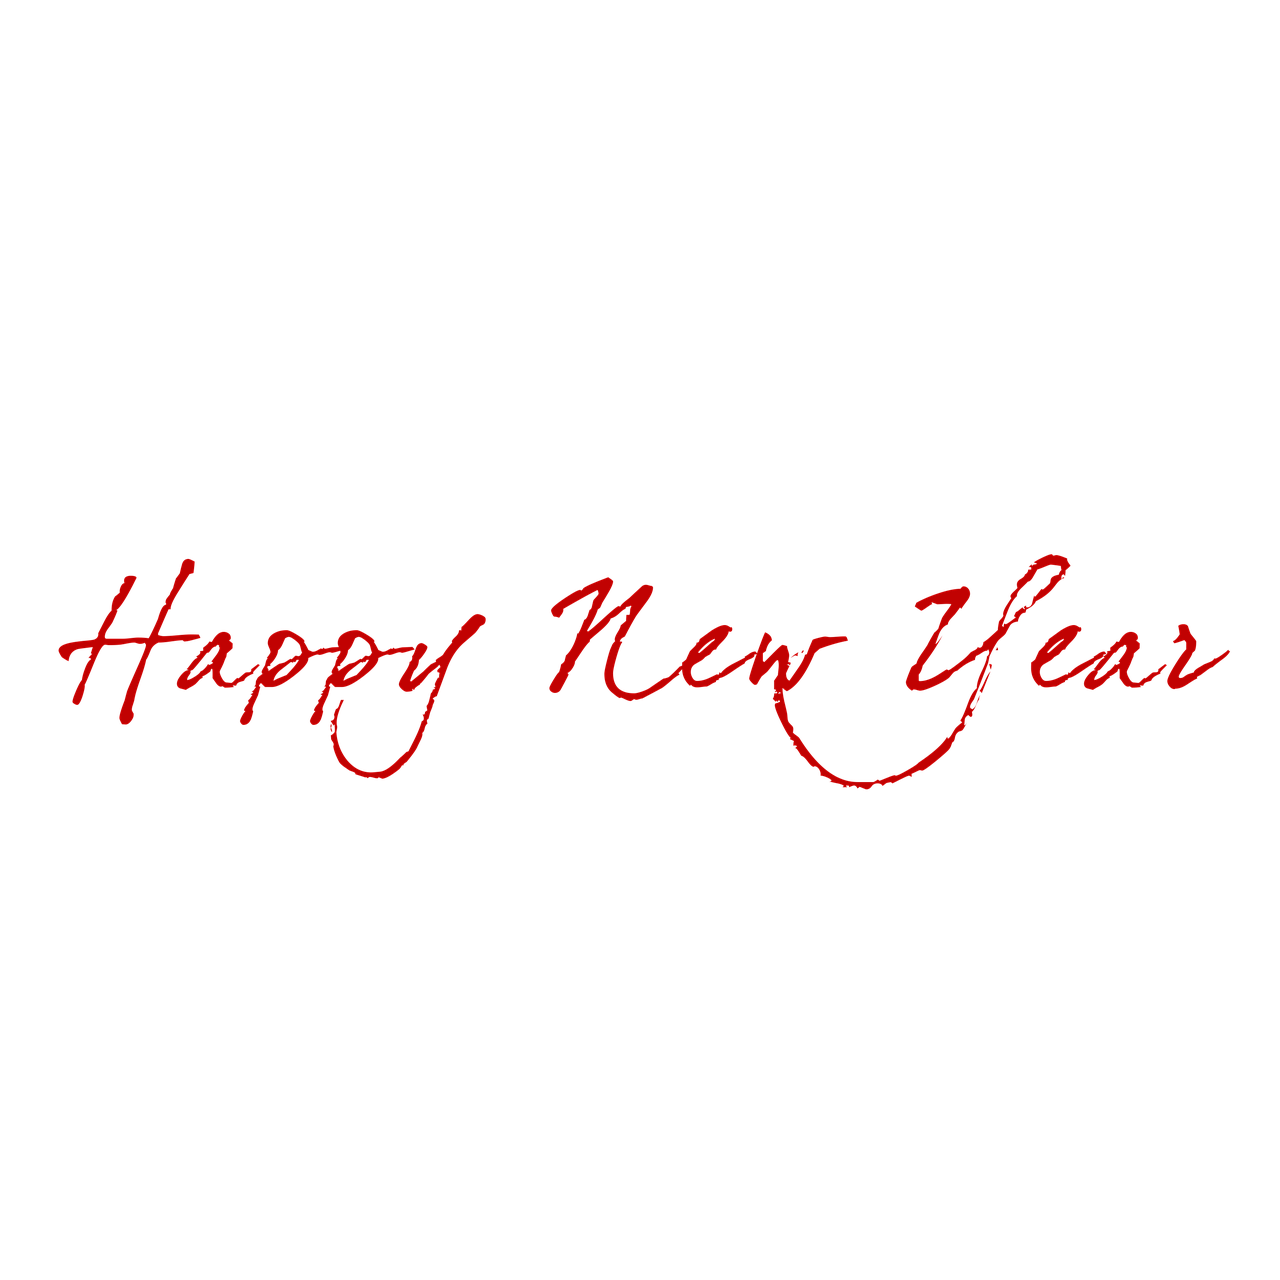 a red happy new year text on a black background, signature, background image, fashion neon light, black and white and red colors